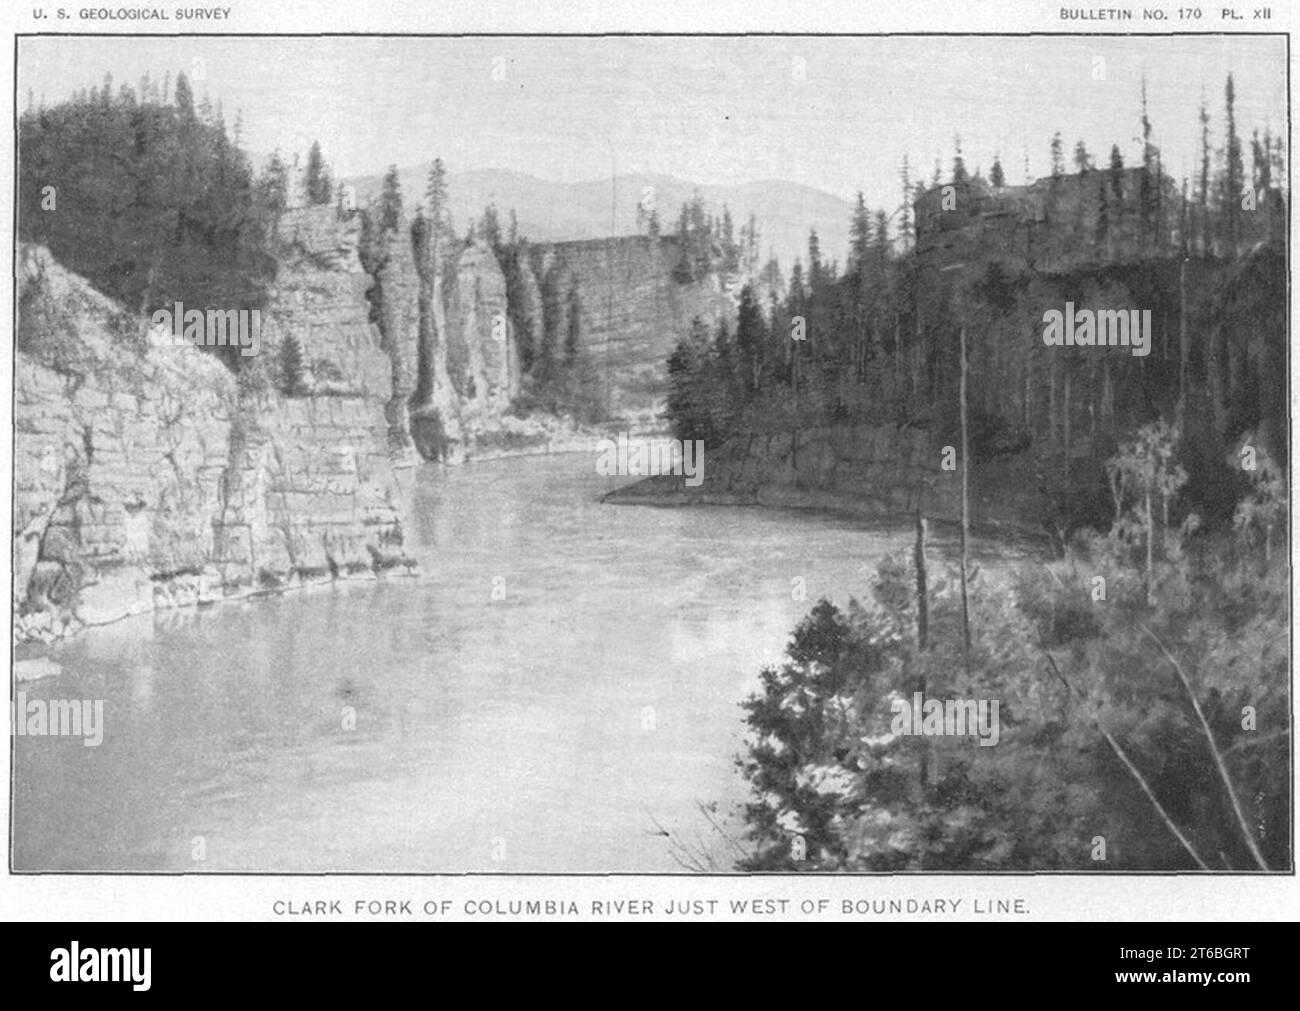 USGS Idaho Montana 1900 Clark Fork Columbia River near Stone Monument 83 Banque D'Images